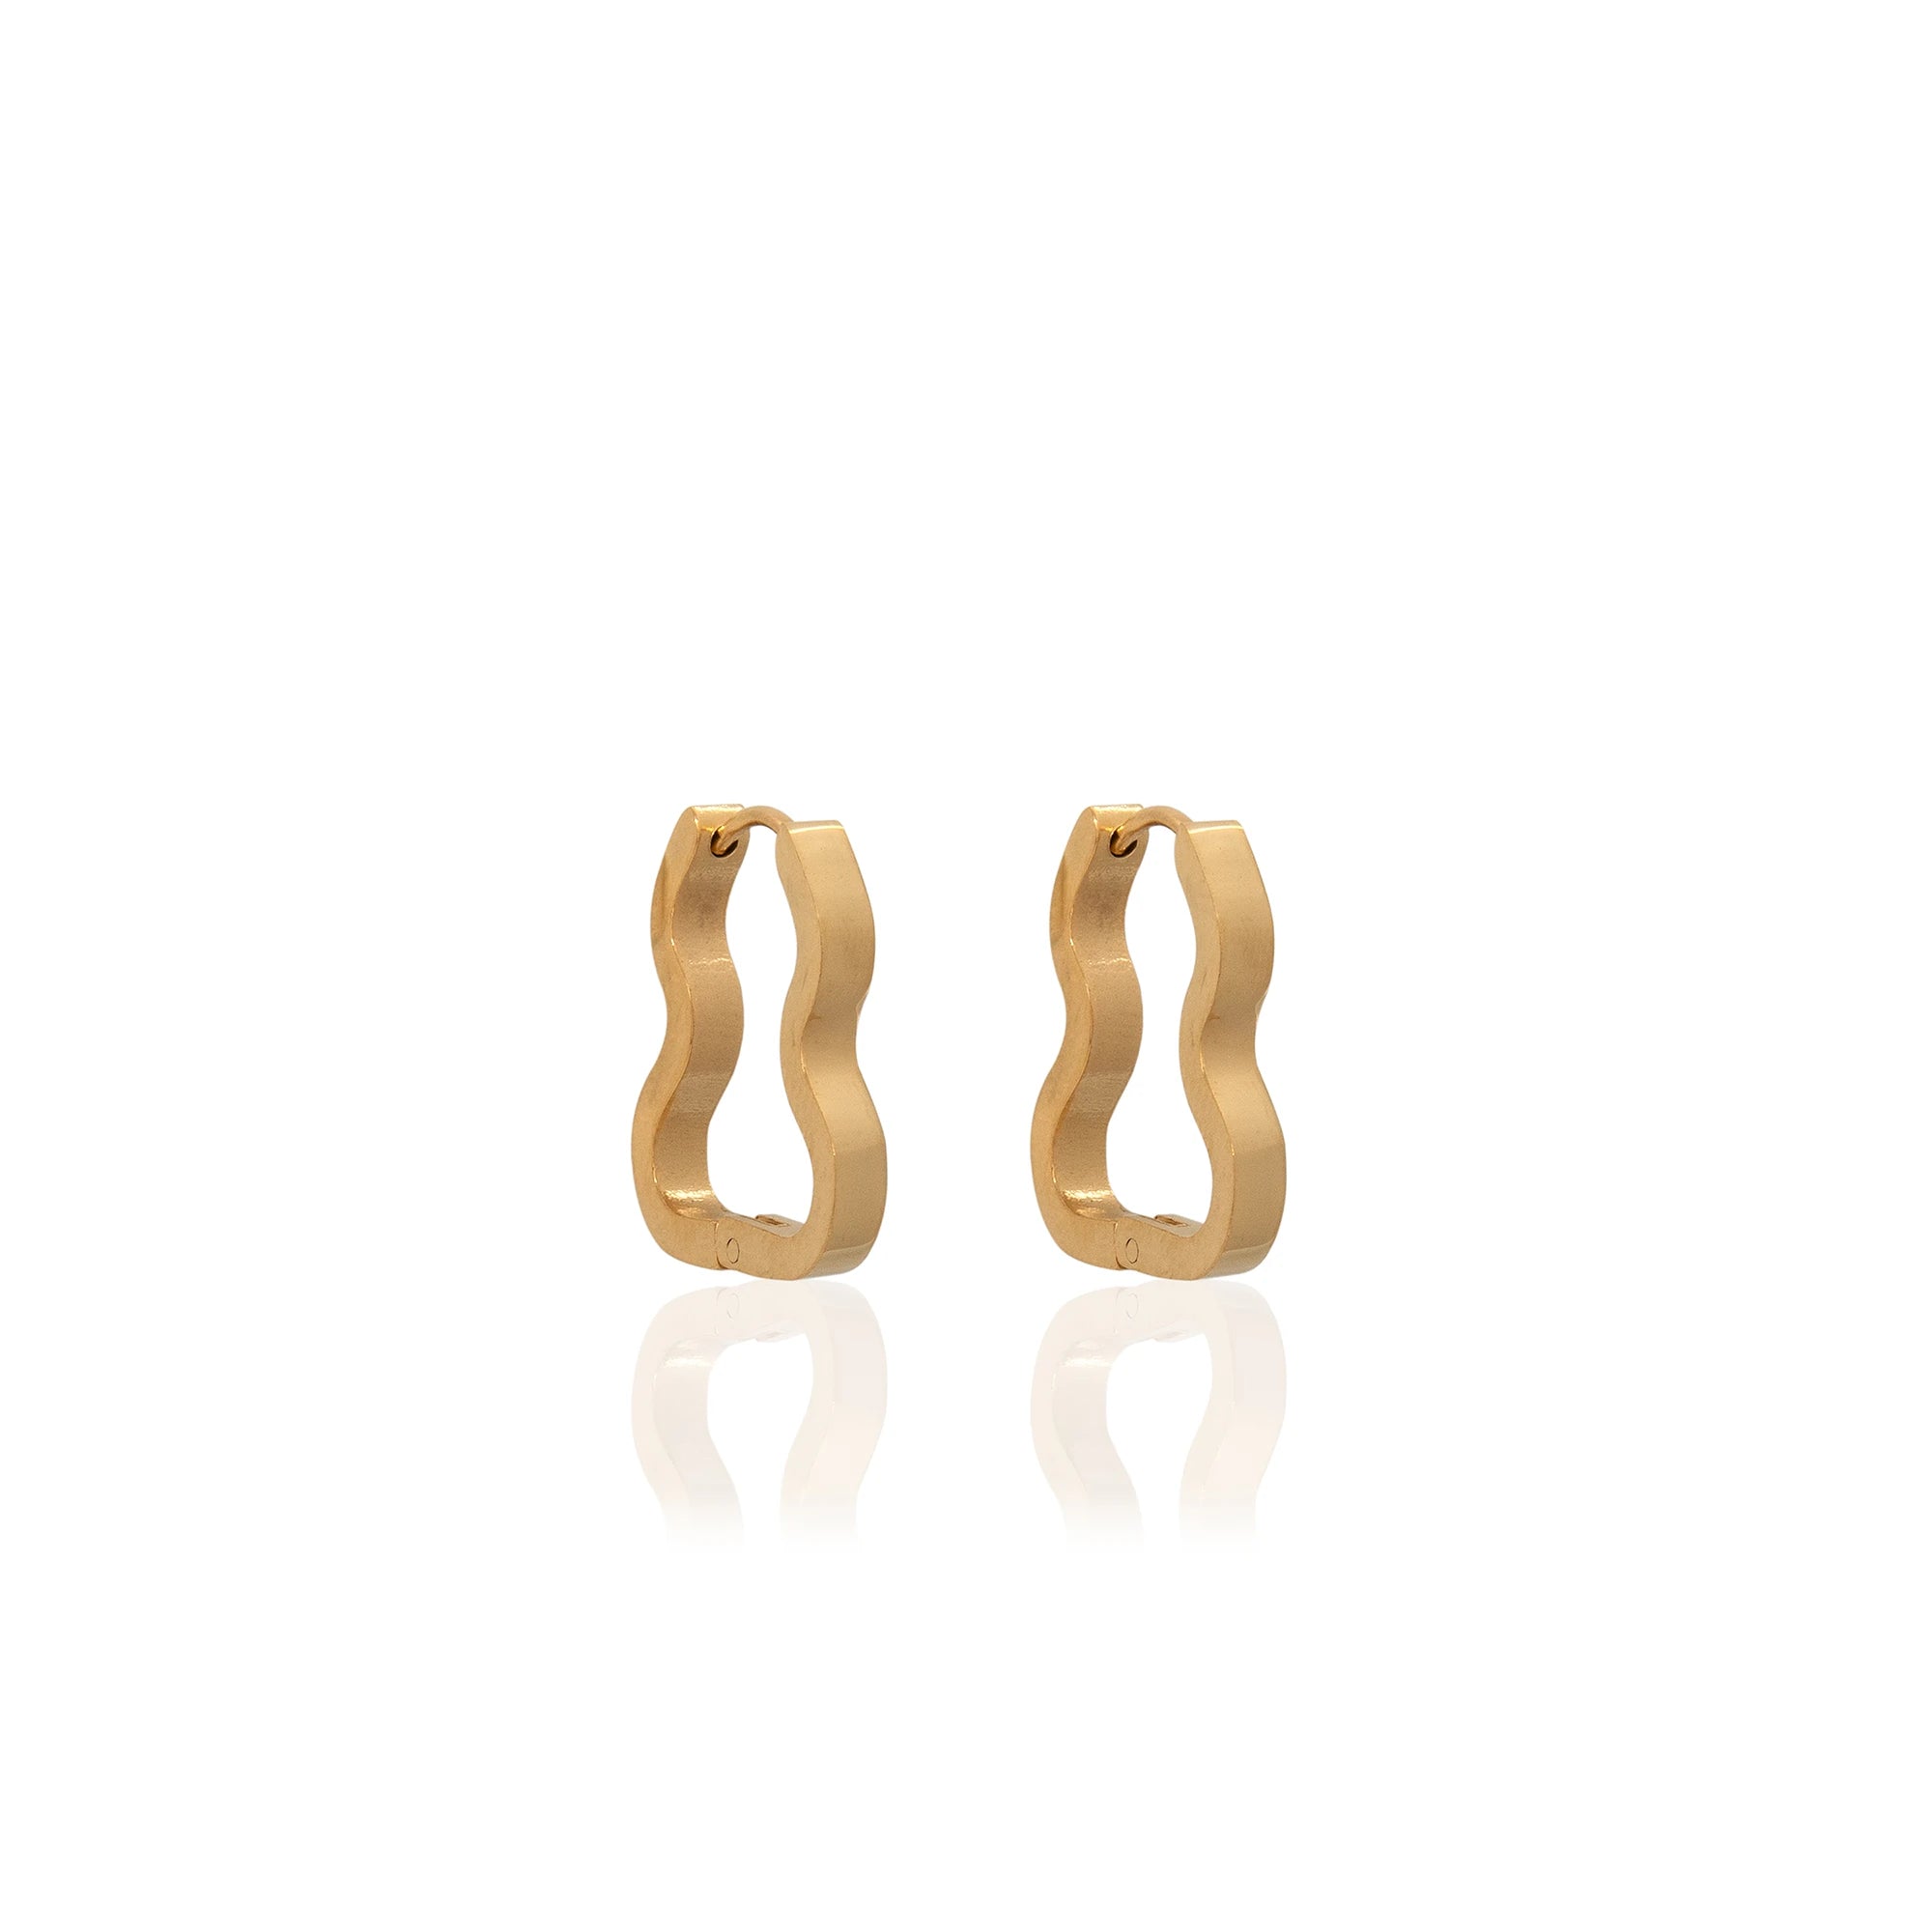 Arya Wavy Hoops in Gold or Silver by A Weathered Penny - Lifestory